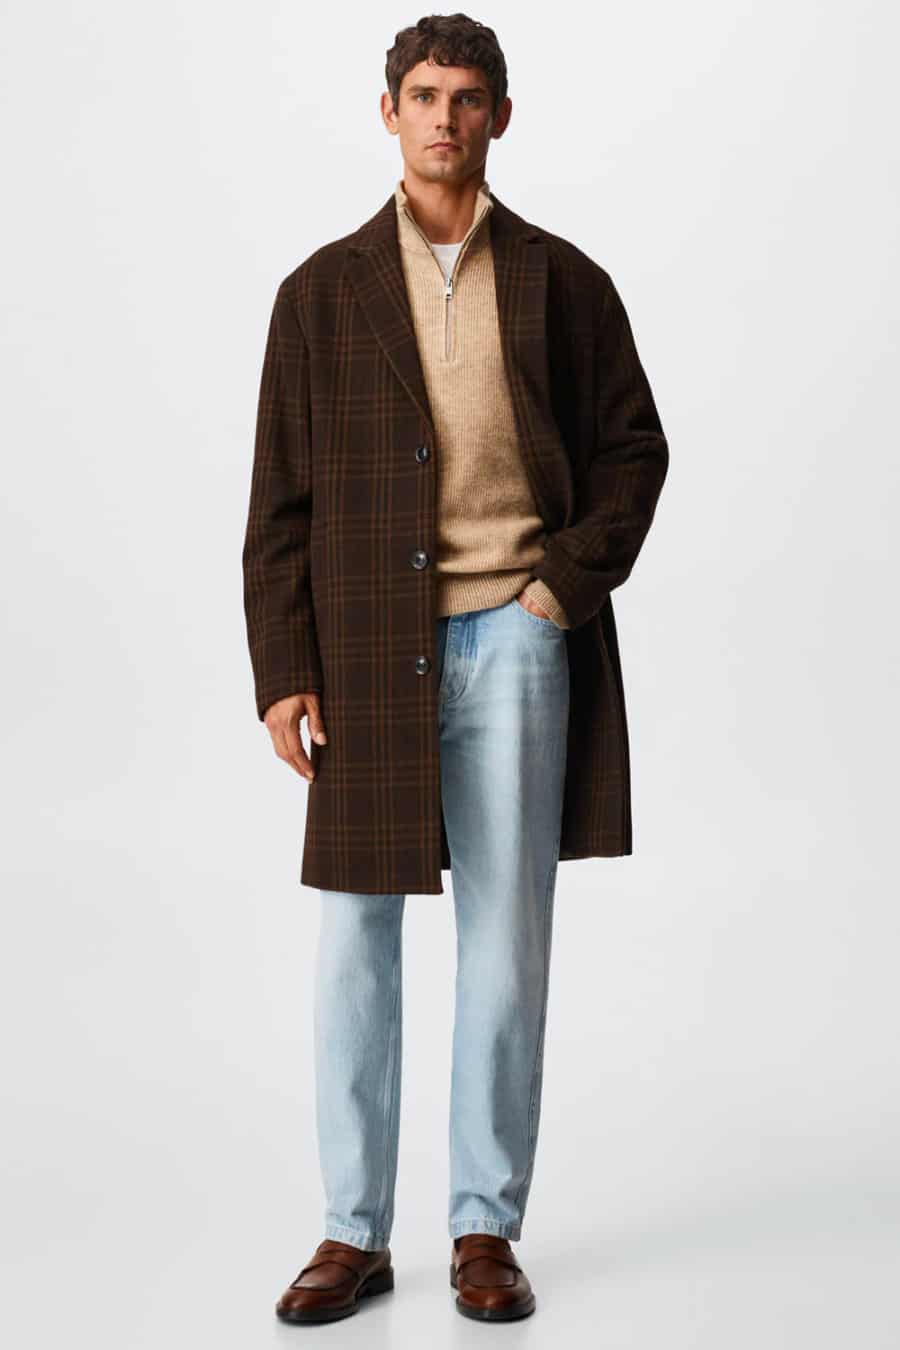 Men's light wash jeans, camel zip neck sweater, brown check overcoat and penny loafers outfit